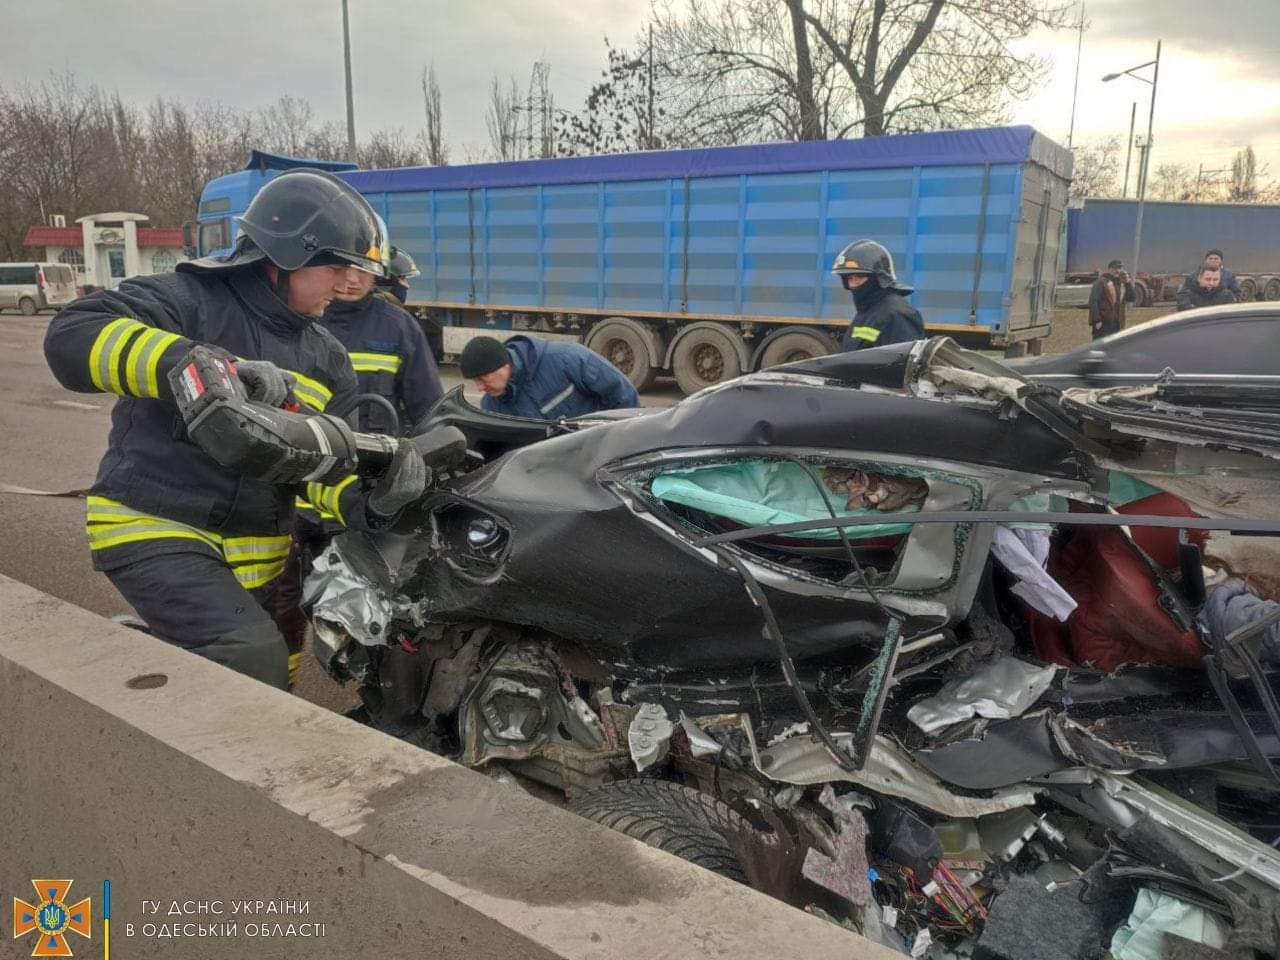 Victoria Danchenko died in an accident while driving a Mercedes